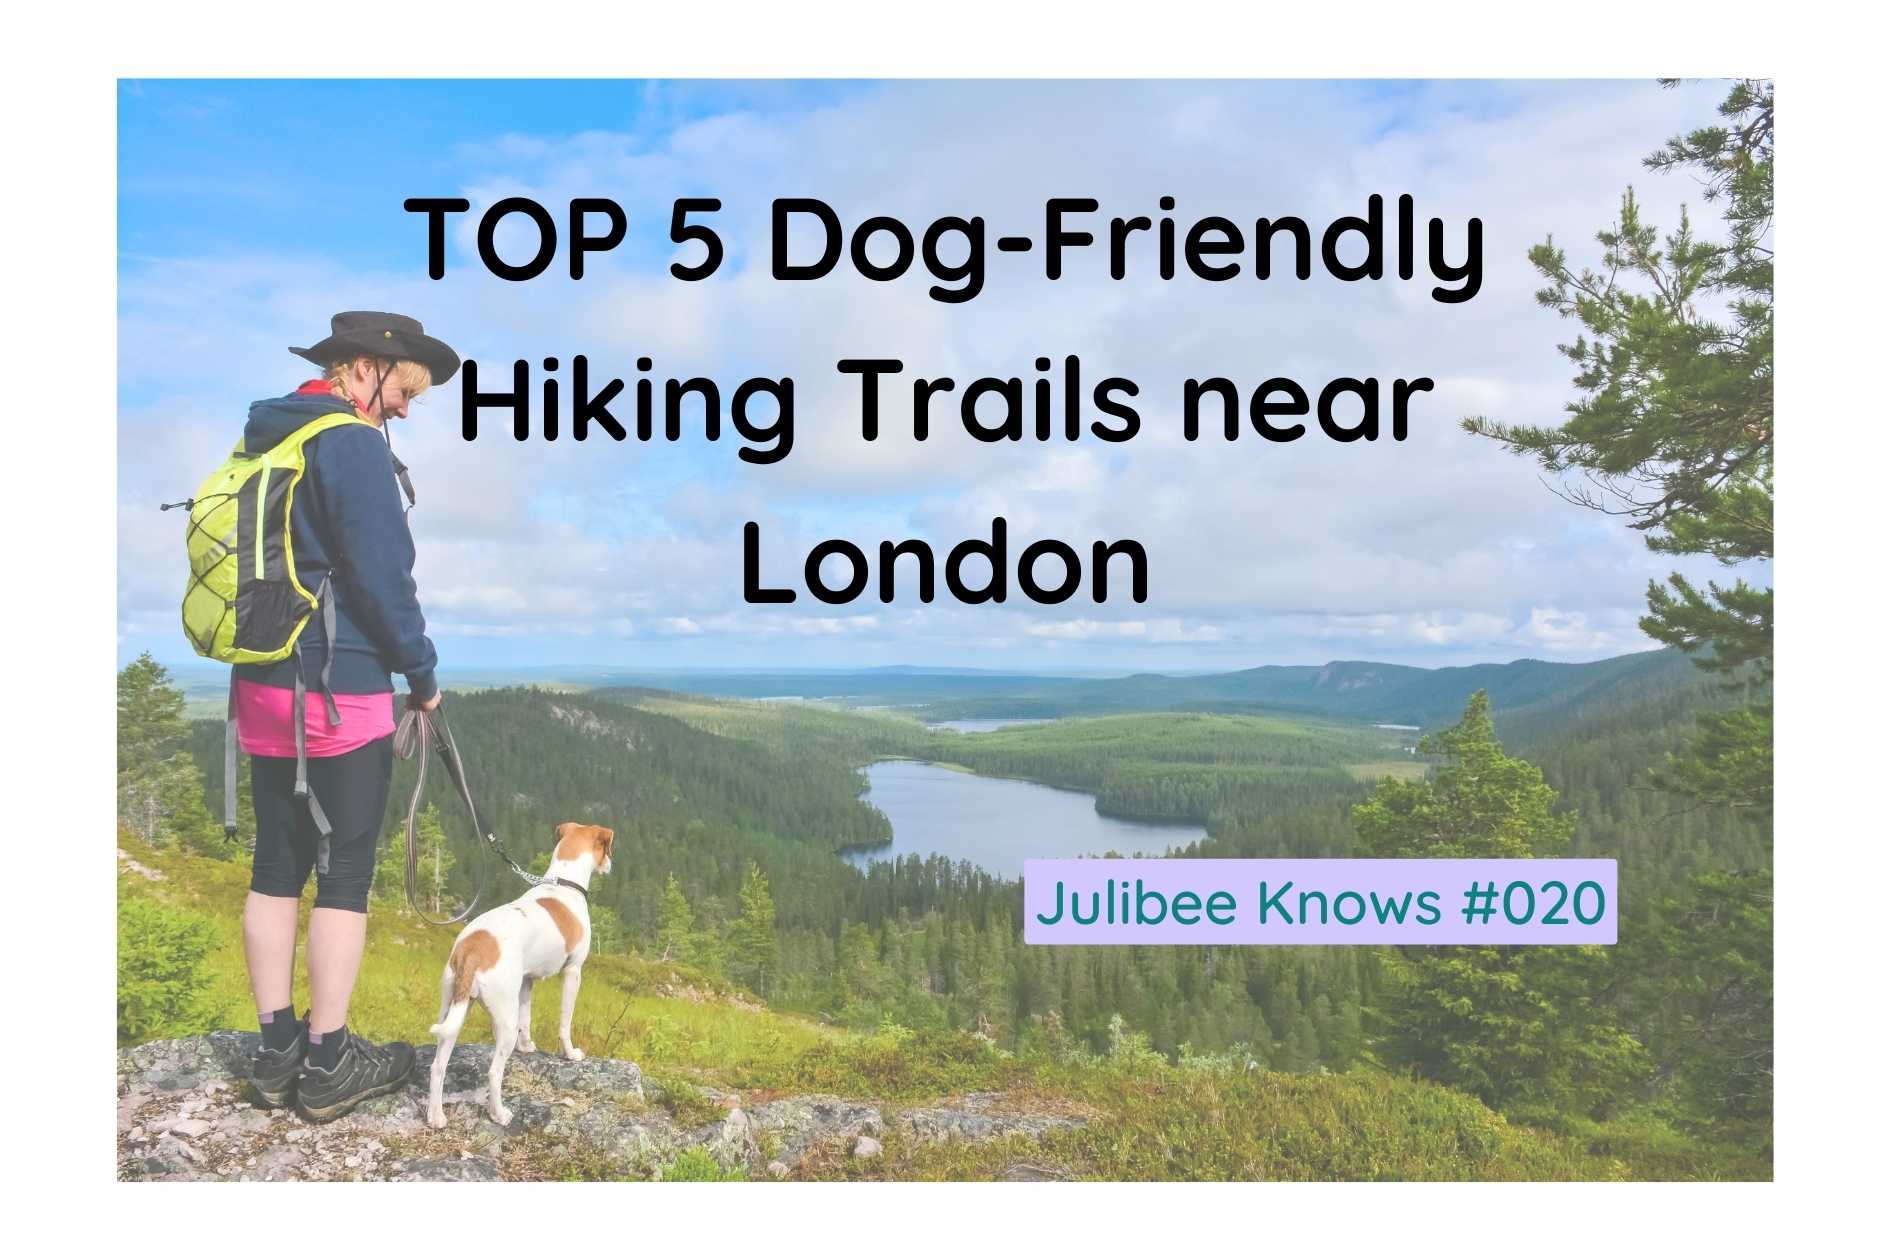 TOP 5 Dog-Friendly Hiking Trails near London for Adventurous Couples and their Furry Friends - Julibee's